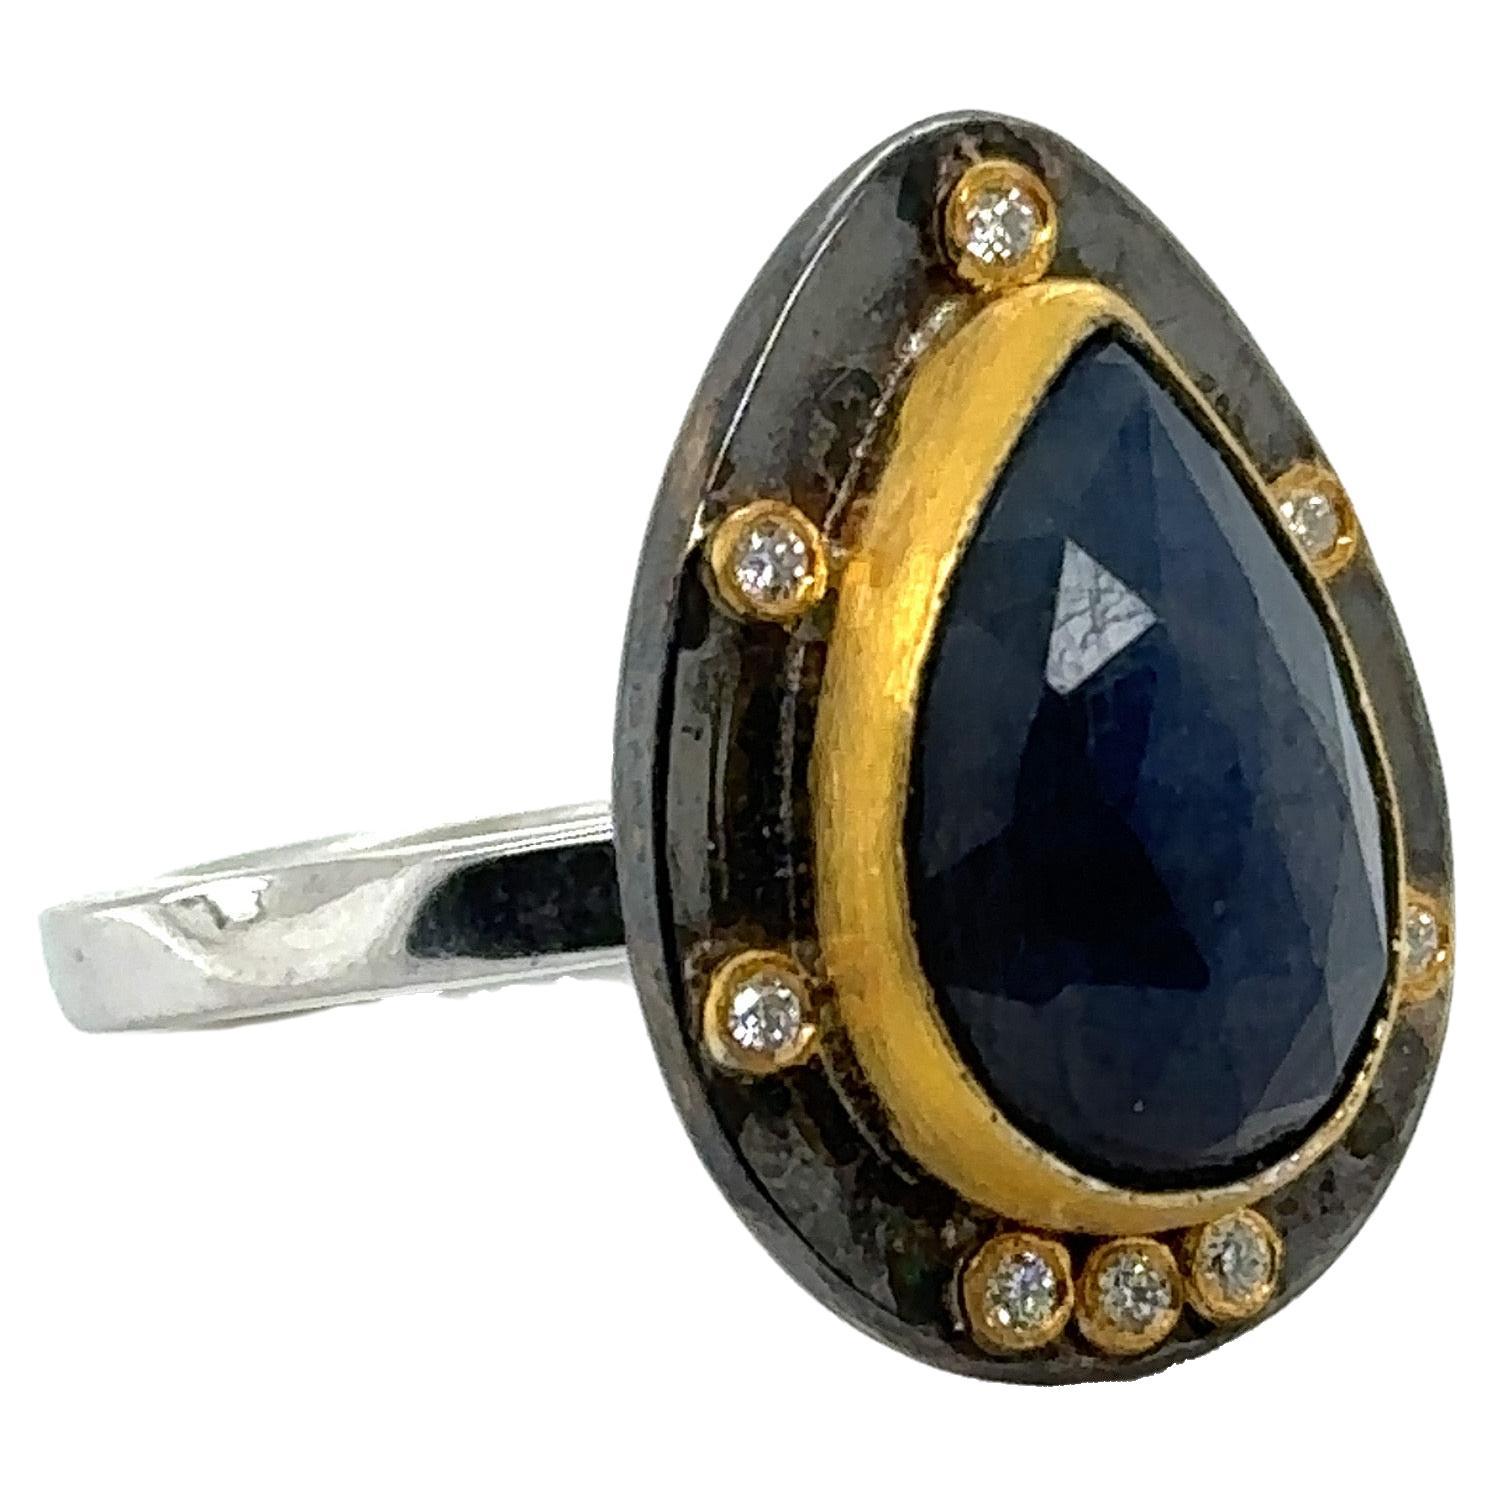 JAS-19-1804 - 24K GOLD/STERLING-Silberring mit 6,00 CT PEAR SHAPE SAPPHIRE